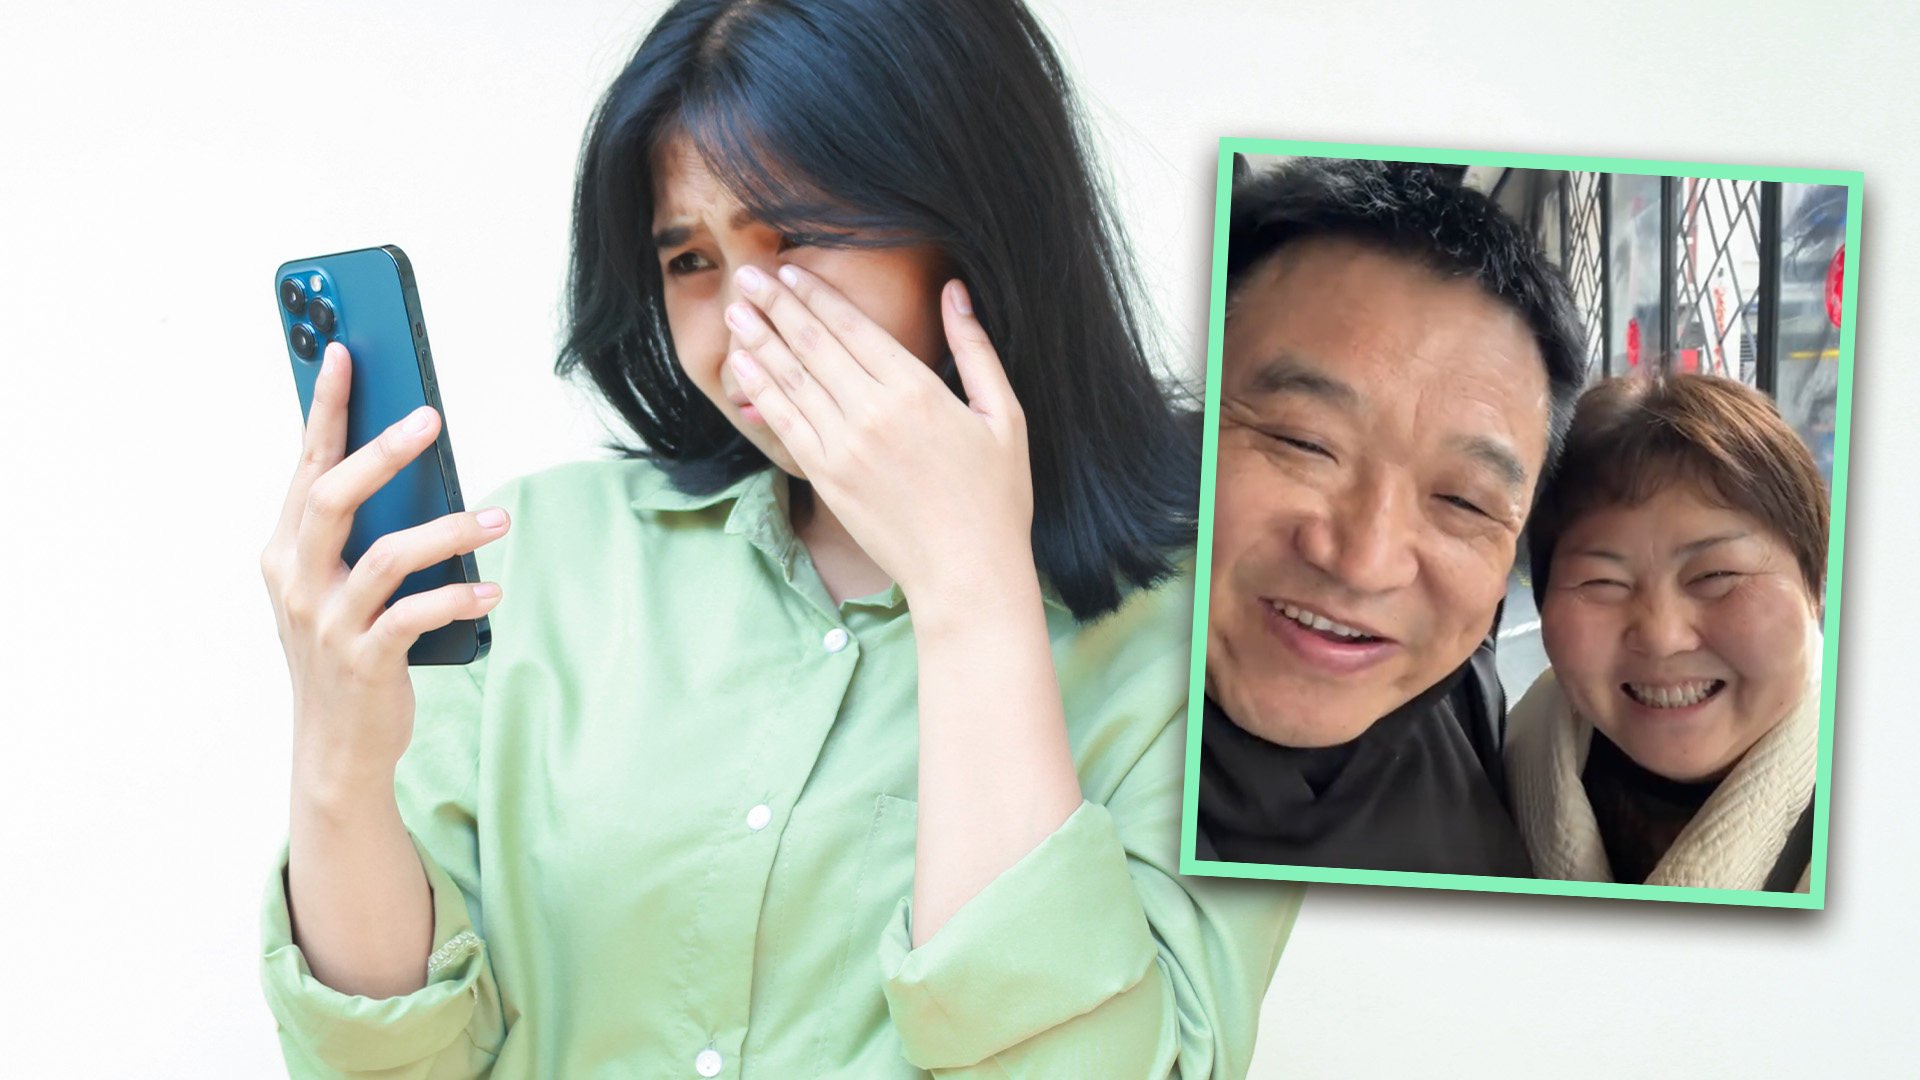 Increasing numbers of young people in China who come from loveless families are seeking solace in “digital parents” on mainland social media. Photo: SCMP composite/Shutterstock/Douyin